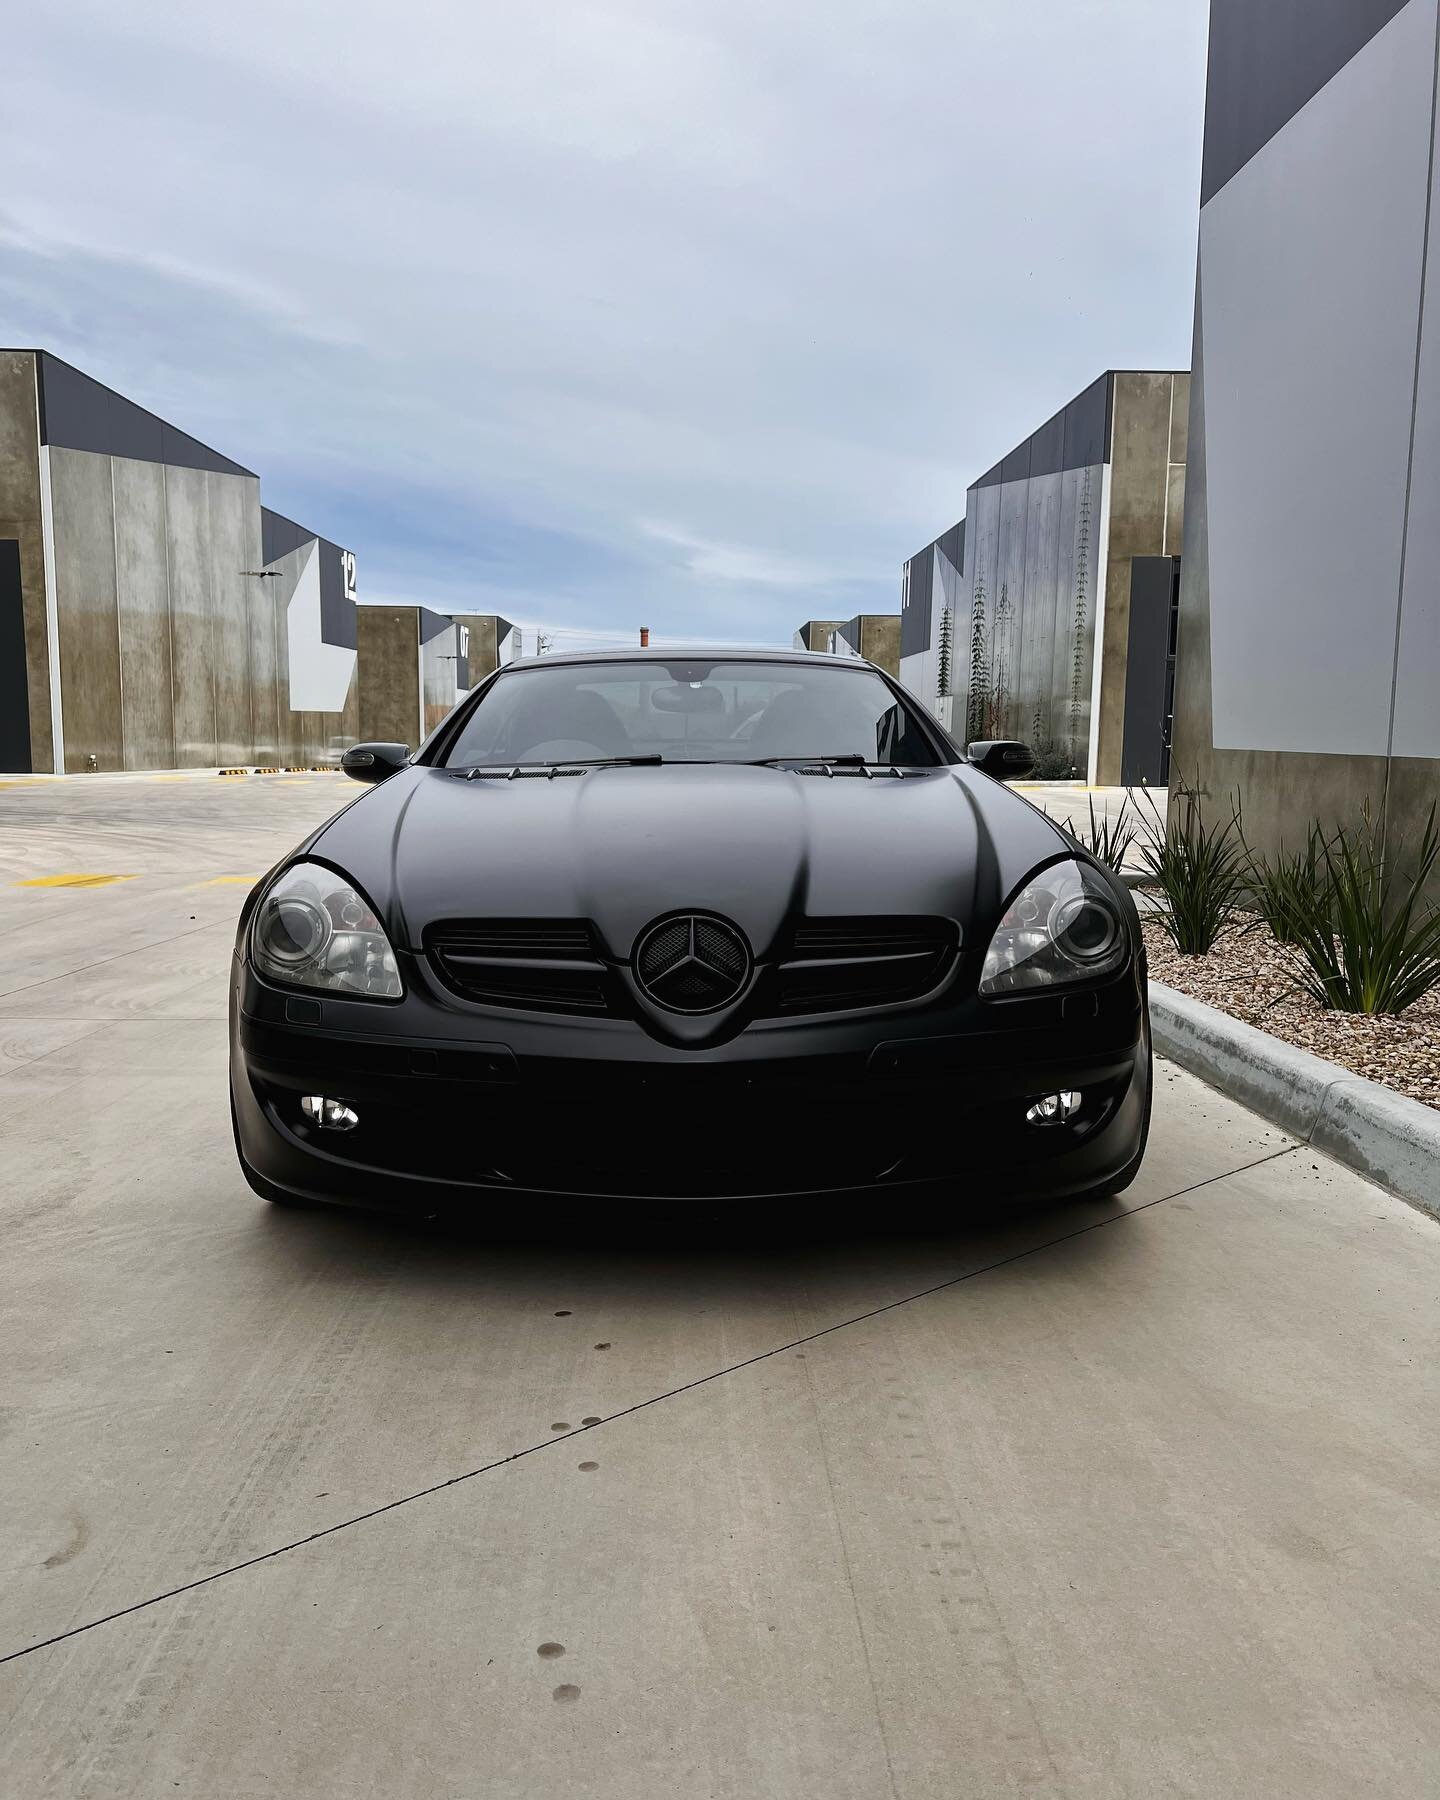 - COLOUR CHANGE - 

Mercedes Benz SLK 350

Gloss Black ➡️ Satin Black

This vehicle also received:

▪️Window Tint
▪️ Headlight Tint
▪️Tail Light Tint
▪️ Chrome Delete
▪️ Painted Wheels
▪️ Painted Callipers 
▪️ Ceramic Coating